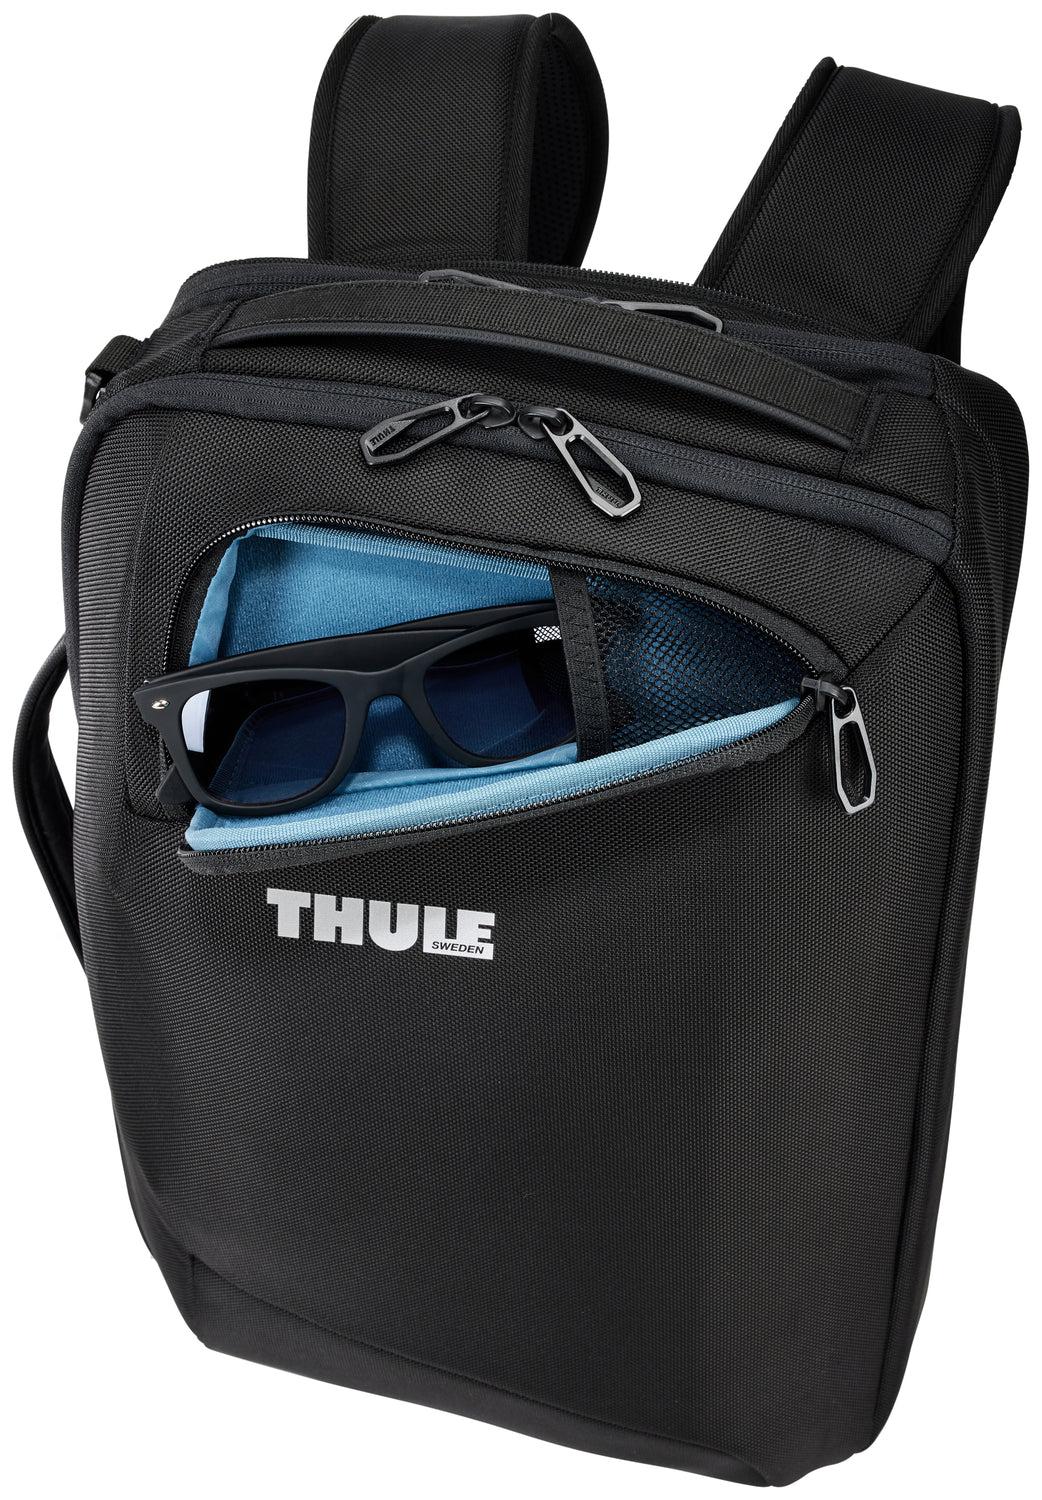 Thule Luggage Accent Convertible Laptop Bag 15.6" – Luggage Pros